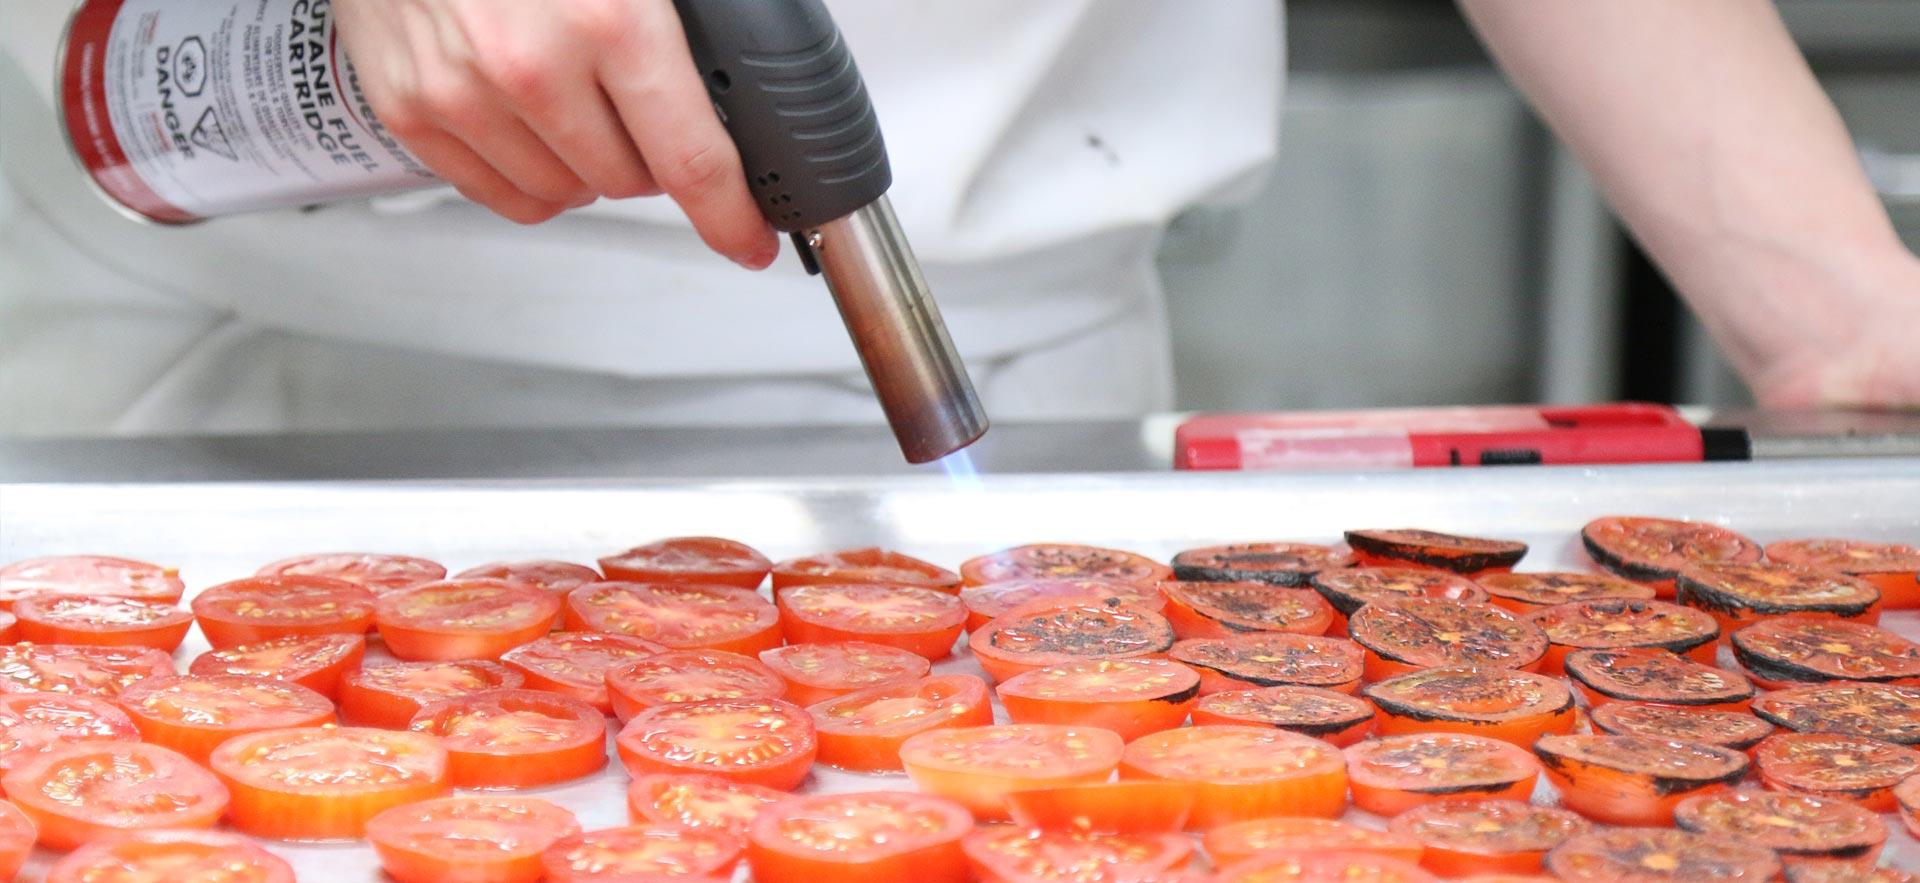 A culinary student fire roasting tomatoes in one the о culinary kitchens.